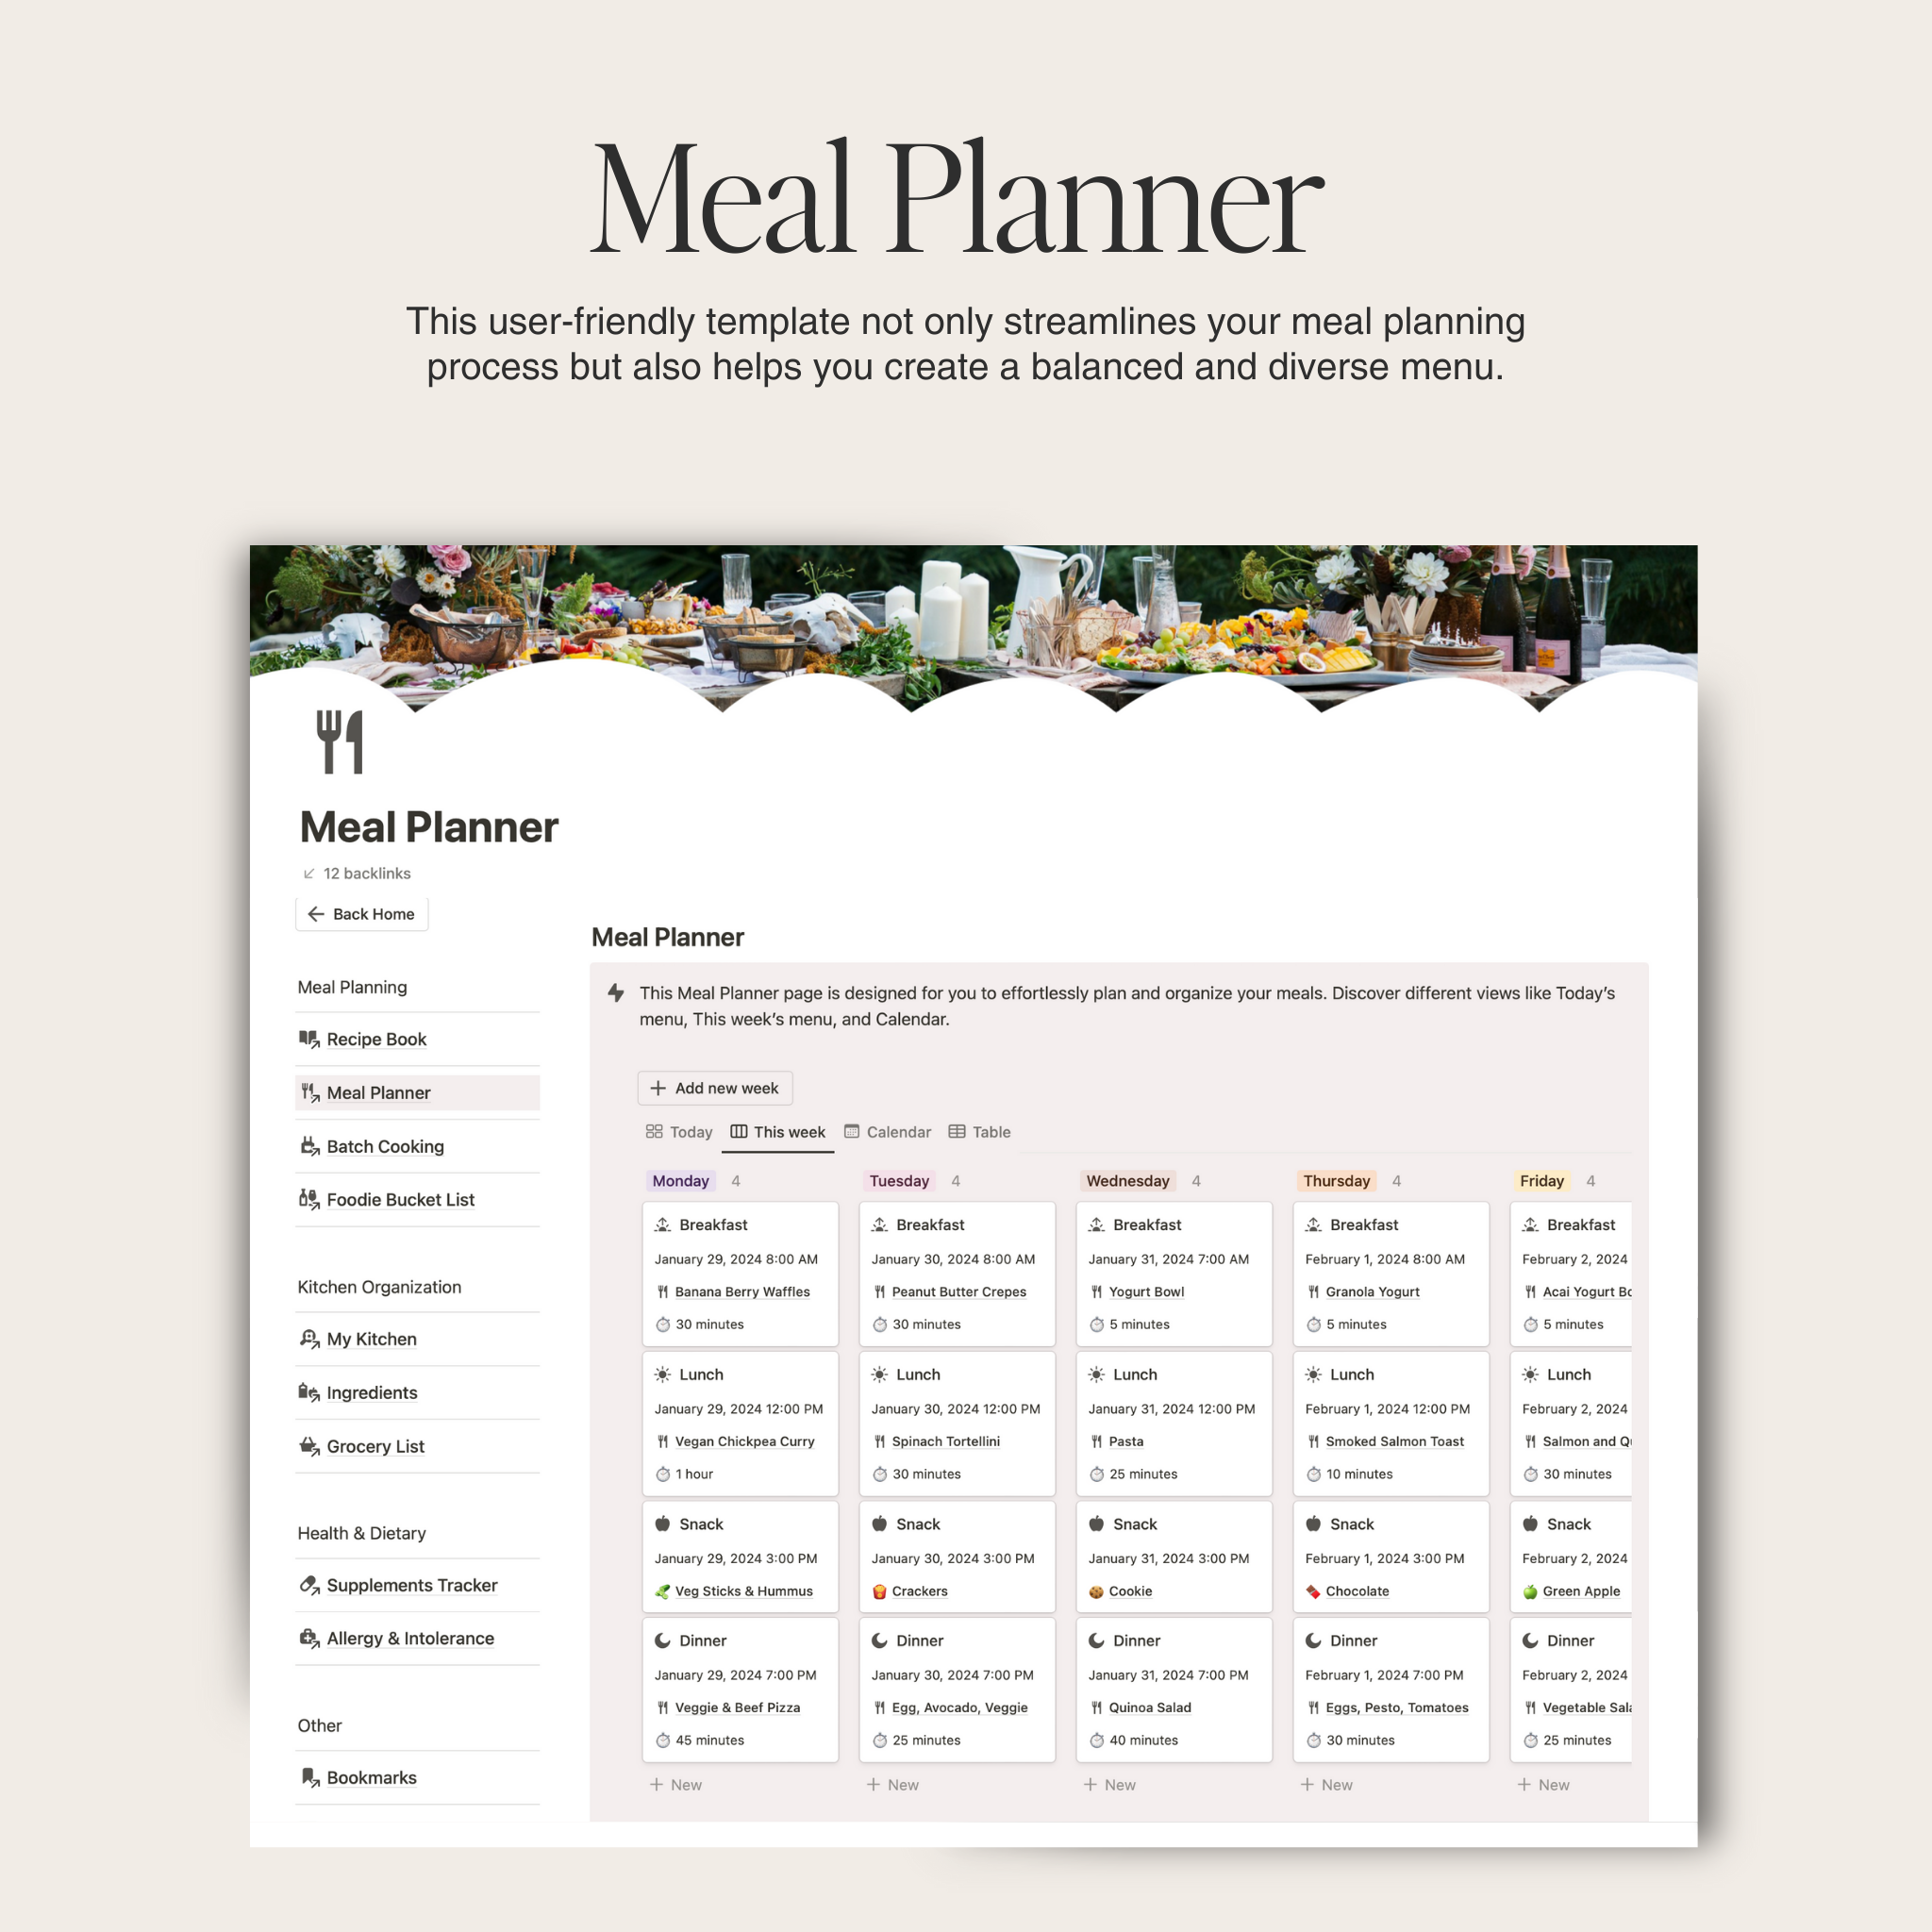 Plan, organize, and prepare your meals like a pro with our meal planner & recipe book.